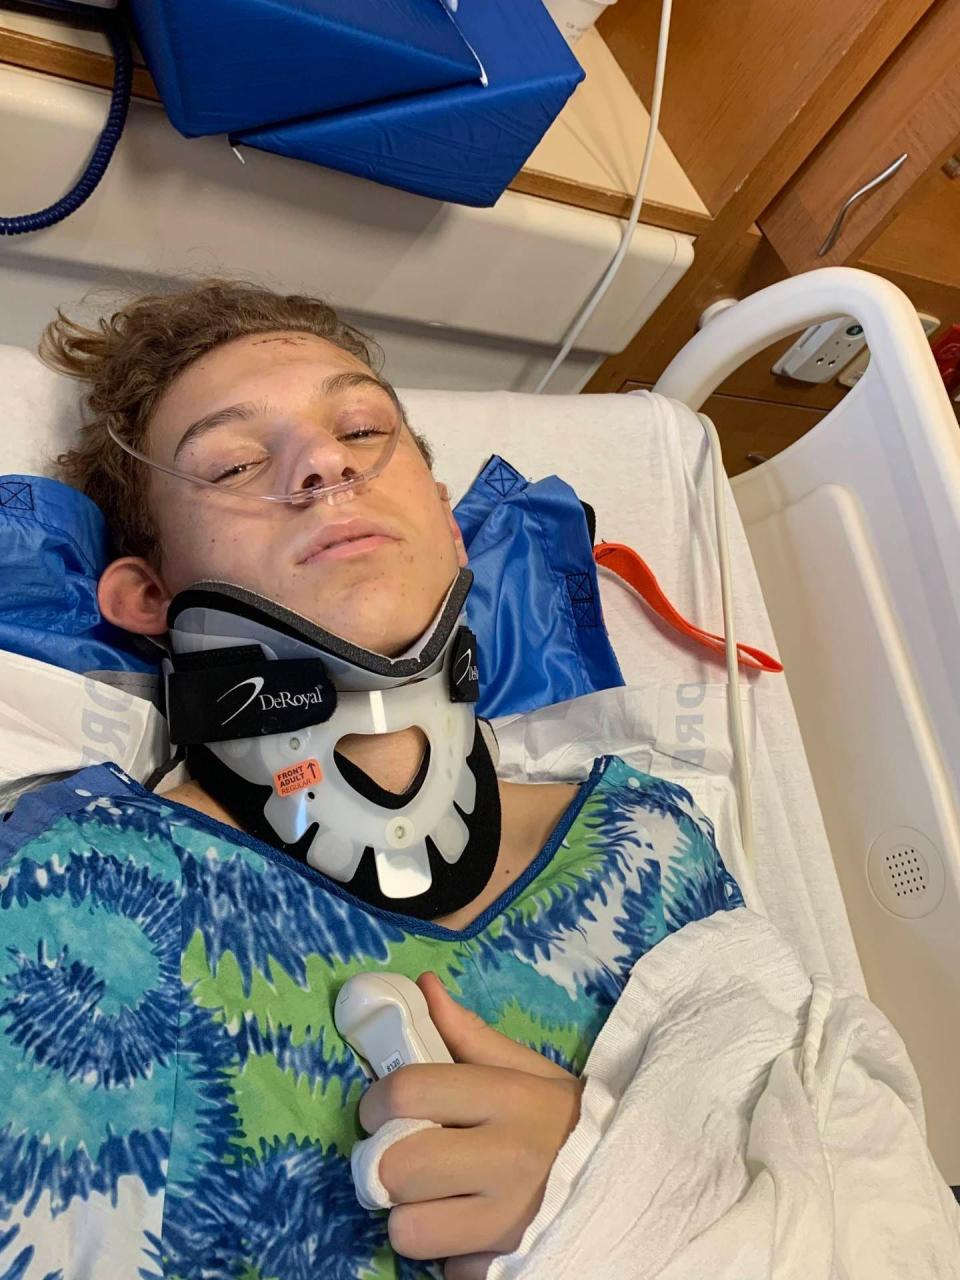 Erick Tiegs was injured at the 2021 Waukesha Parade while playing trombone with the Waukesha South marching band. An SUV ran over him, leaving him with injuries including a skull fracture, C-4 vertebrae fracture, a broken left femur and broken ribs. He has now committed to playing college baseball at Beloit College.